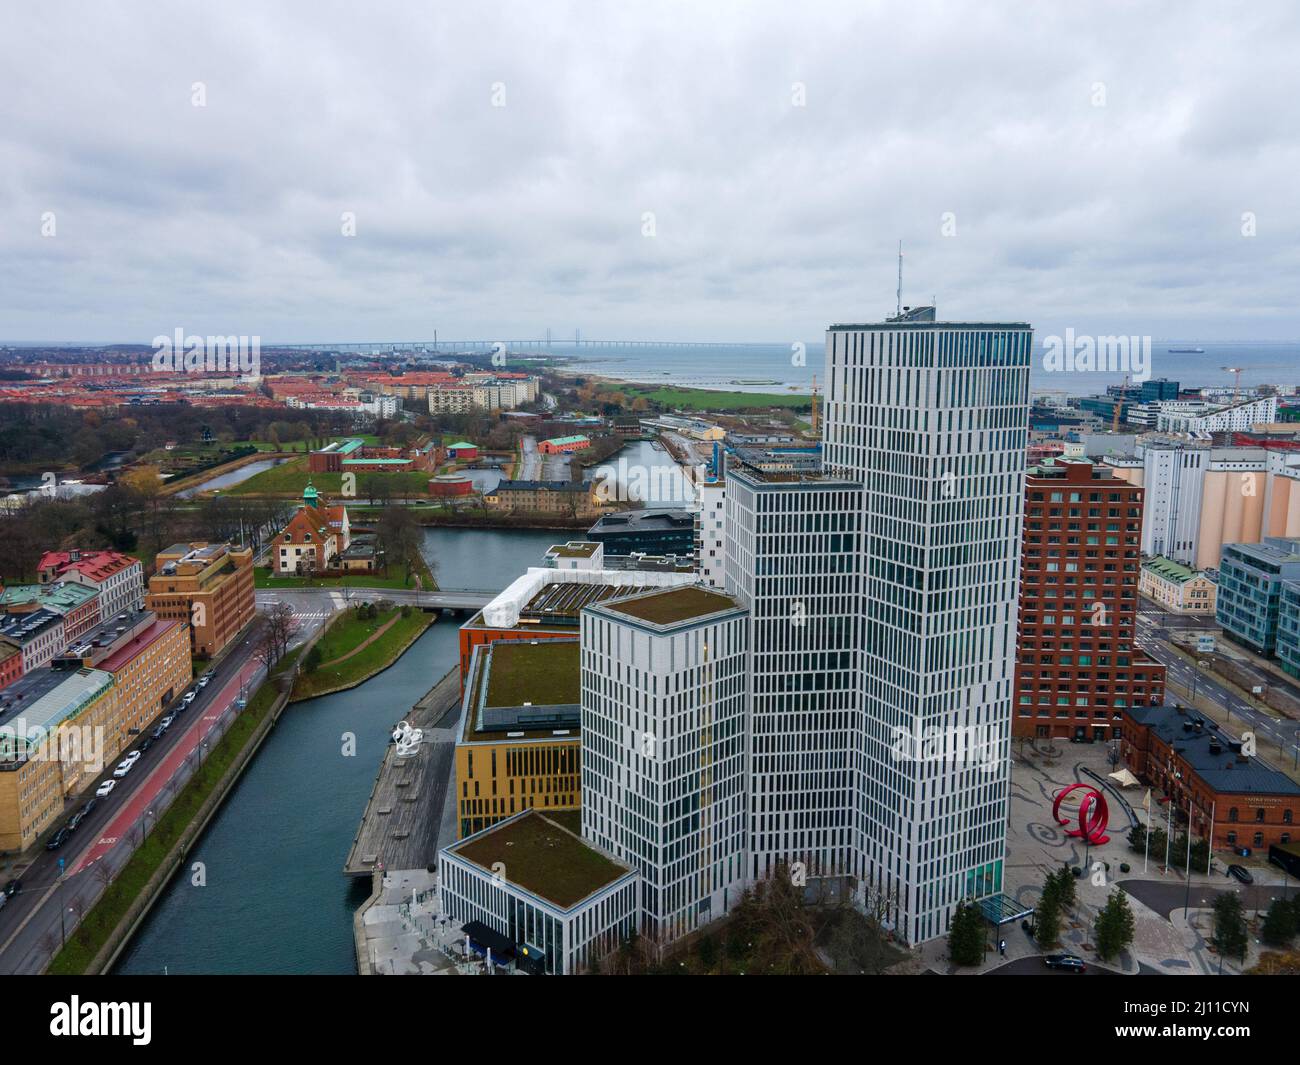 Malmö, Sweden - 28 12 2020: Aerial view of the Malmö modern buildings. Drone shot. Stock Photo